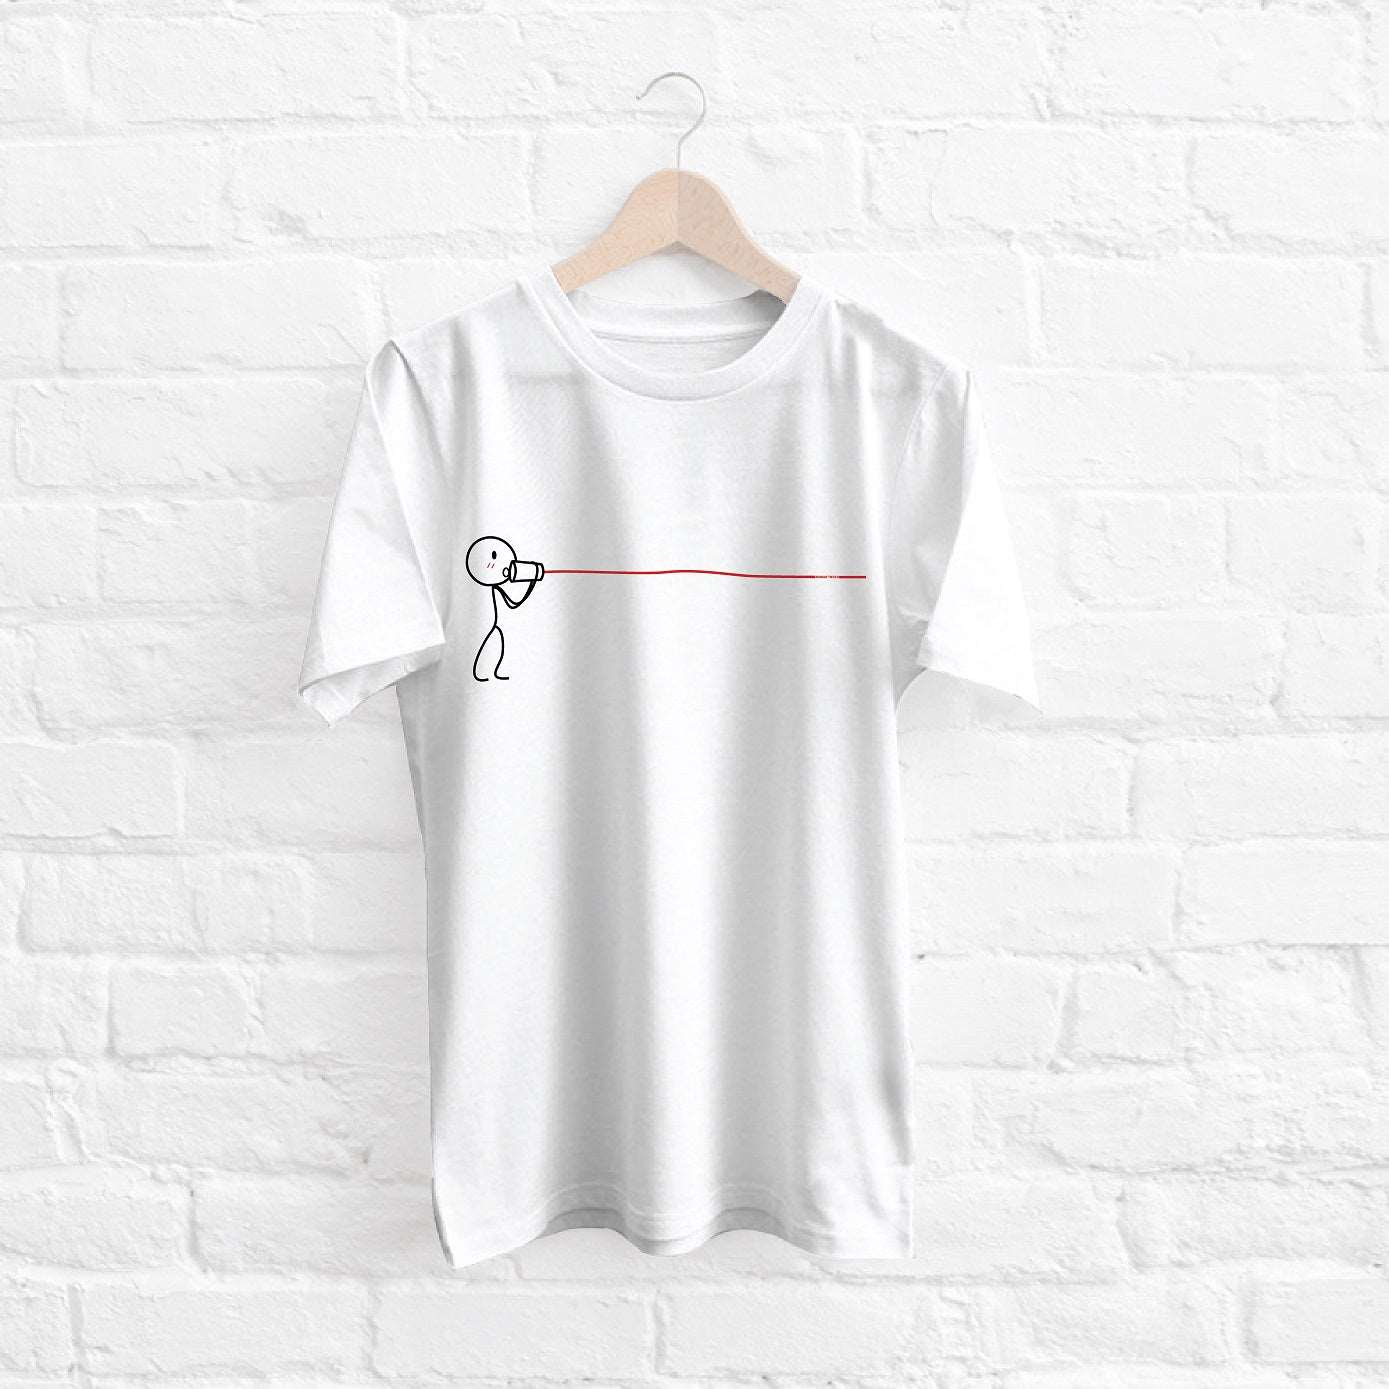 How about this: Get a unique and charming white tee with an artistic design, perfect for couples and anniversaries. Great gift for him or her!